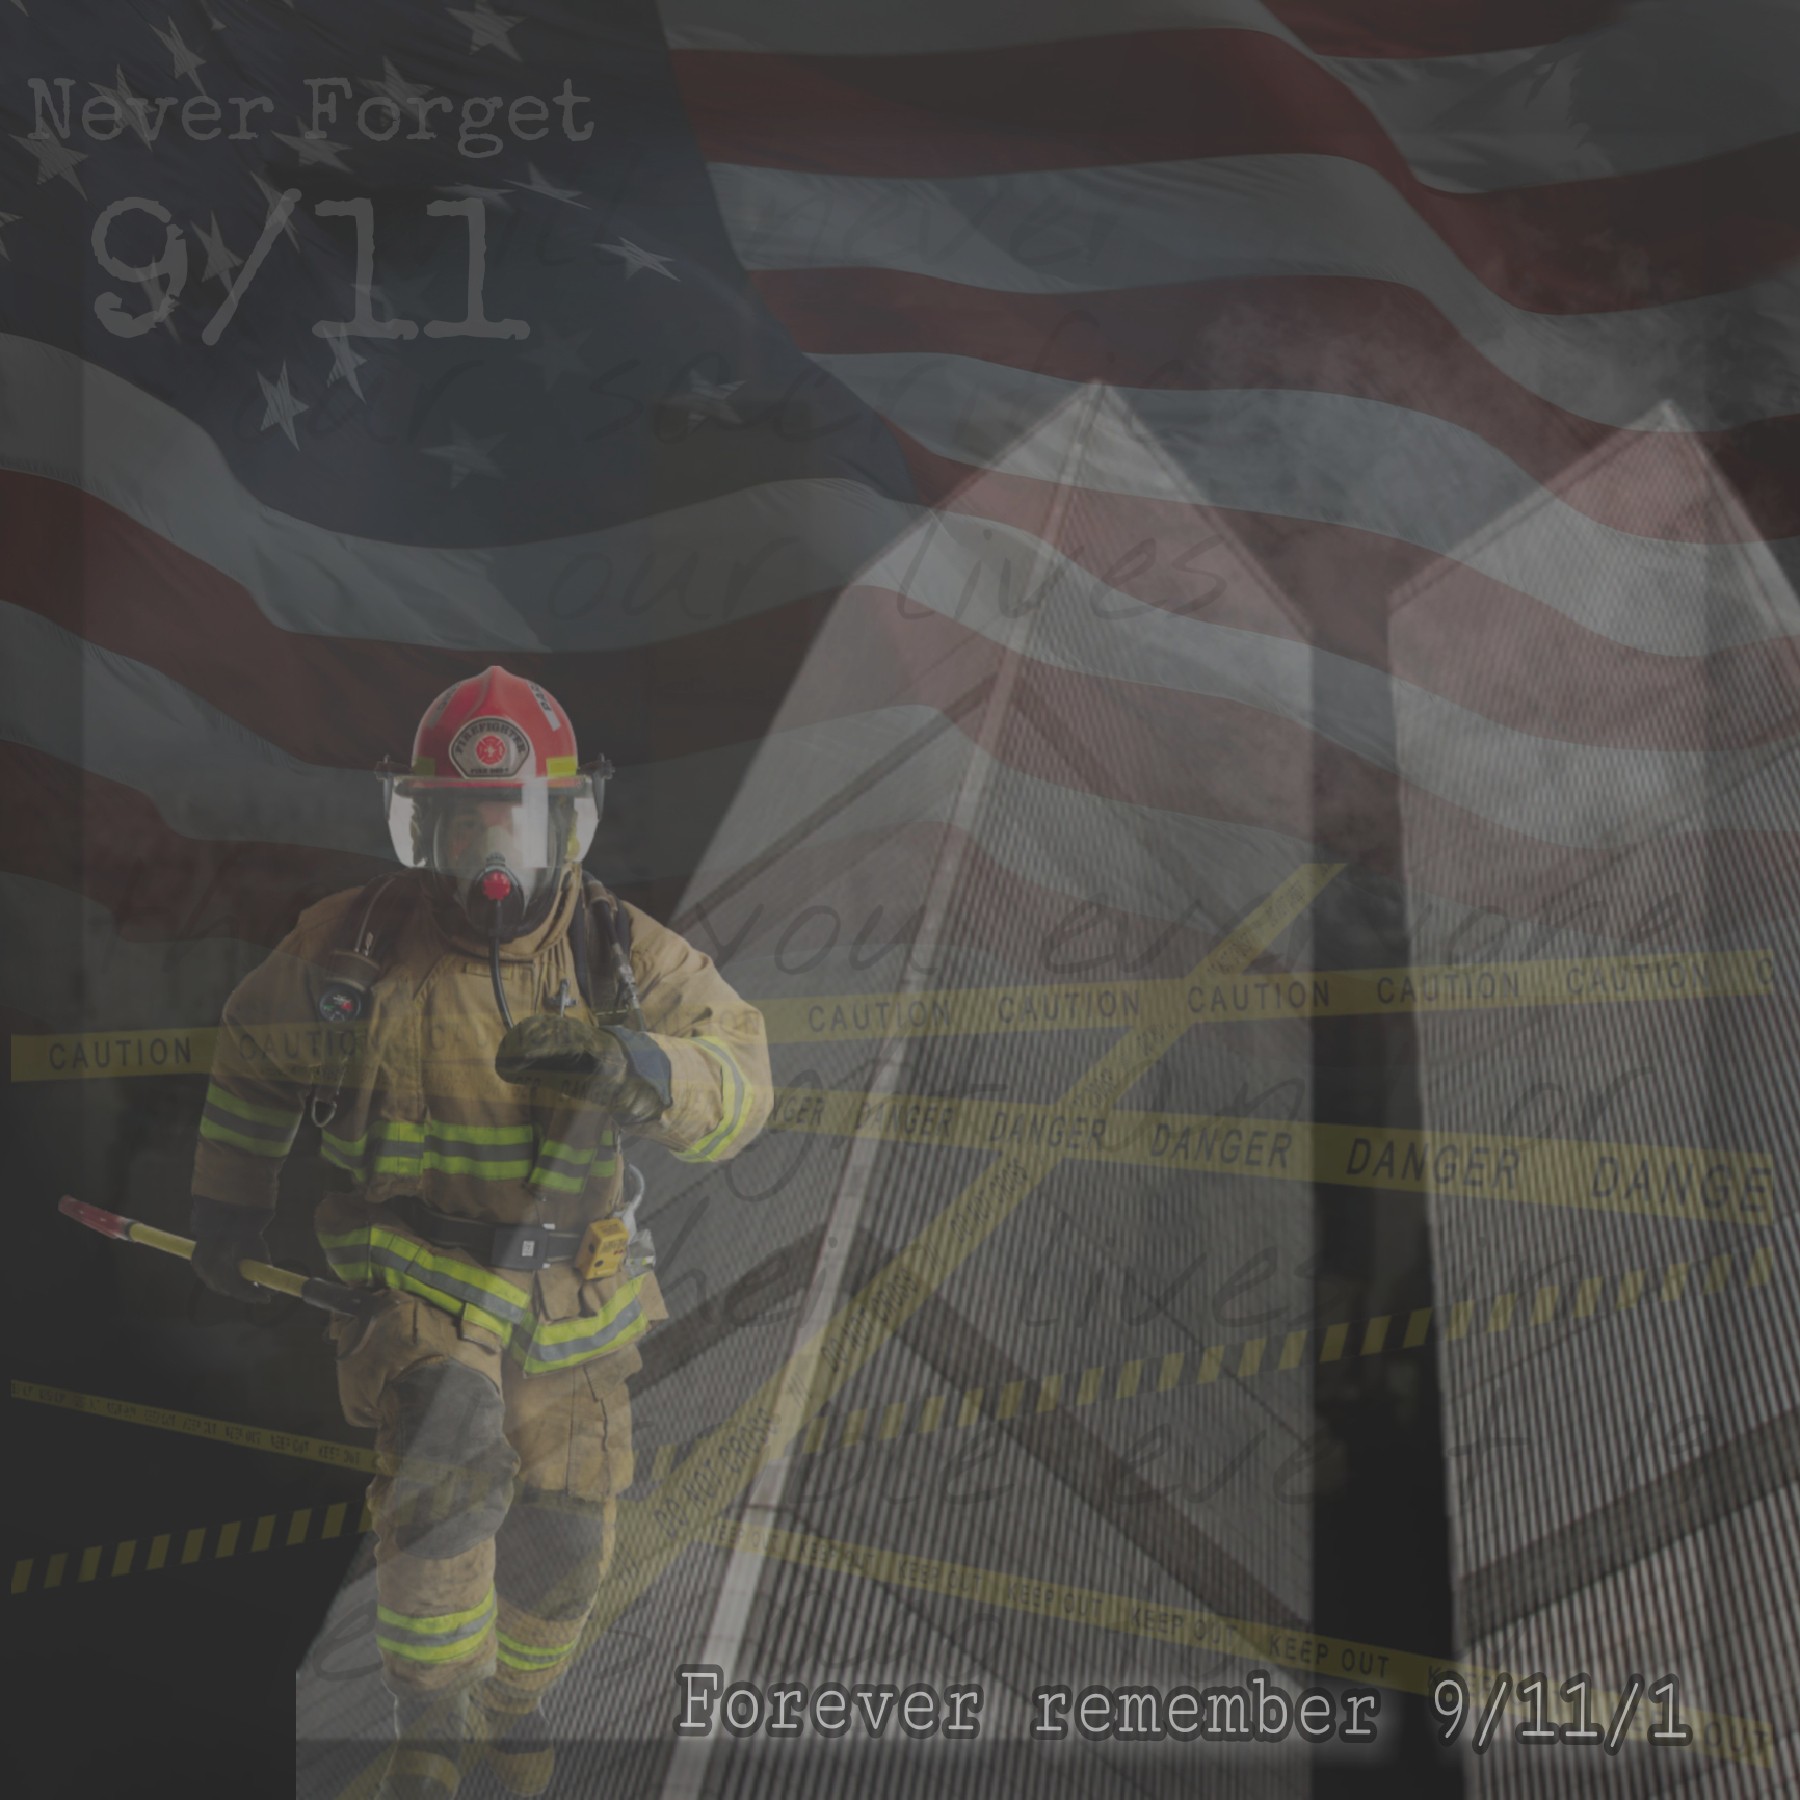 ❤ Never Forget 9/11 ❤
I made this in picsart last night and I was crying while making it becuase my uncle died during 9/11 and even though I've never met him I still teared up. ❤🕊❤